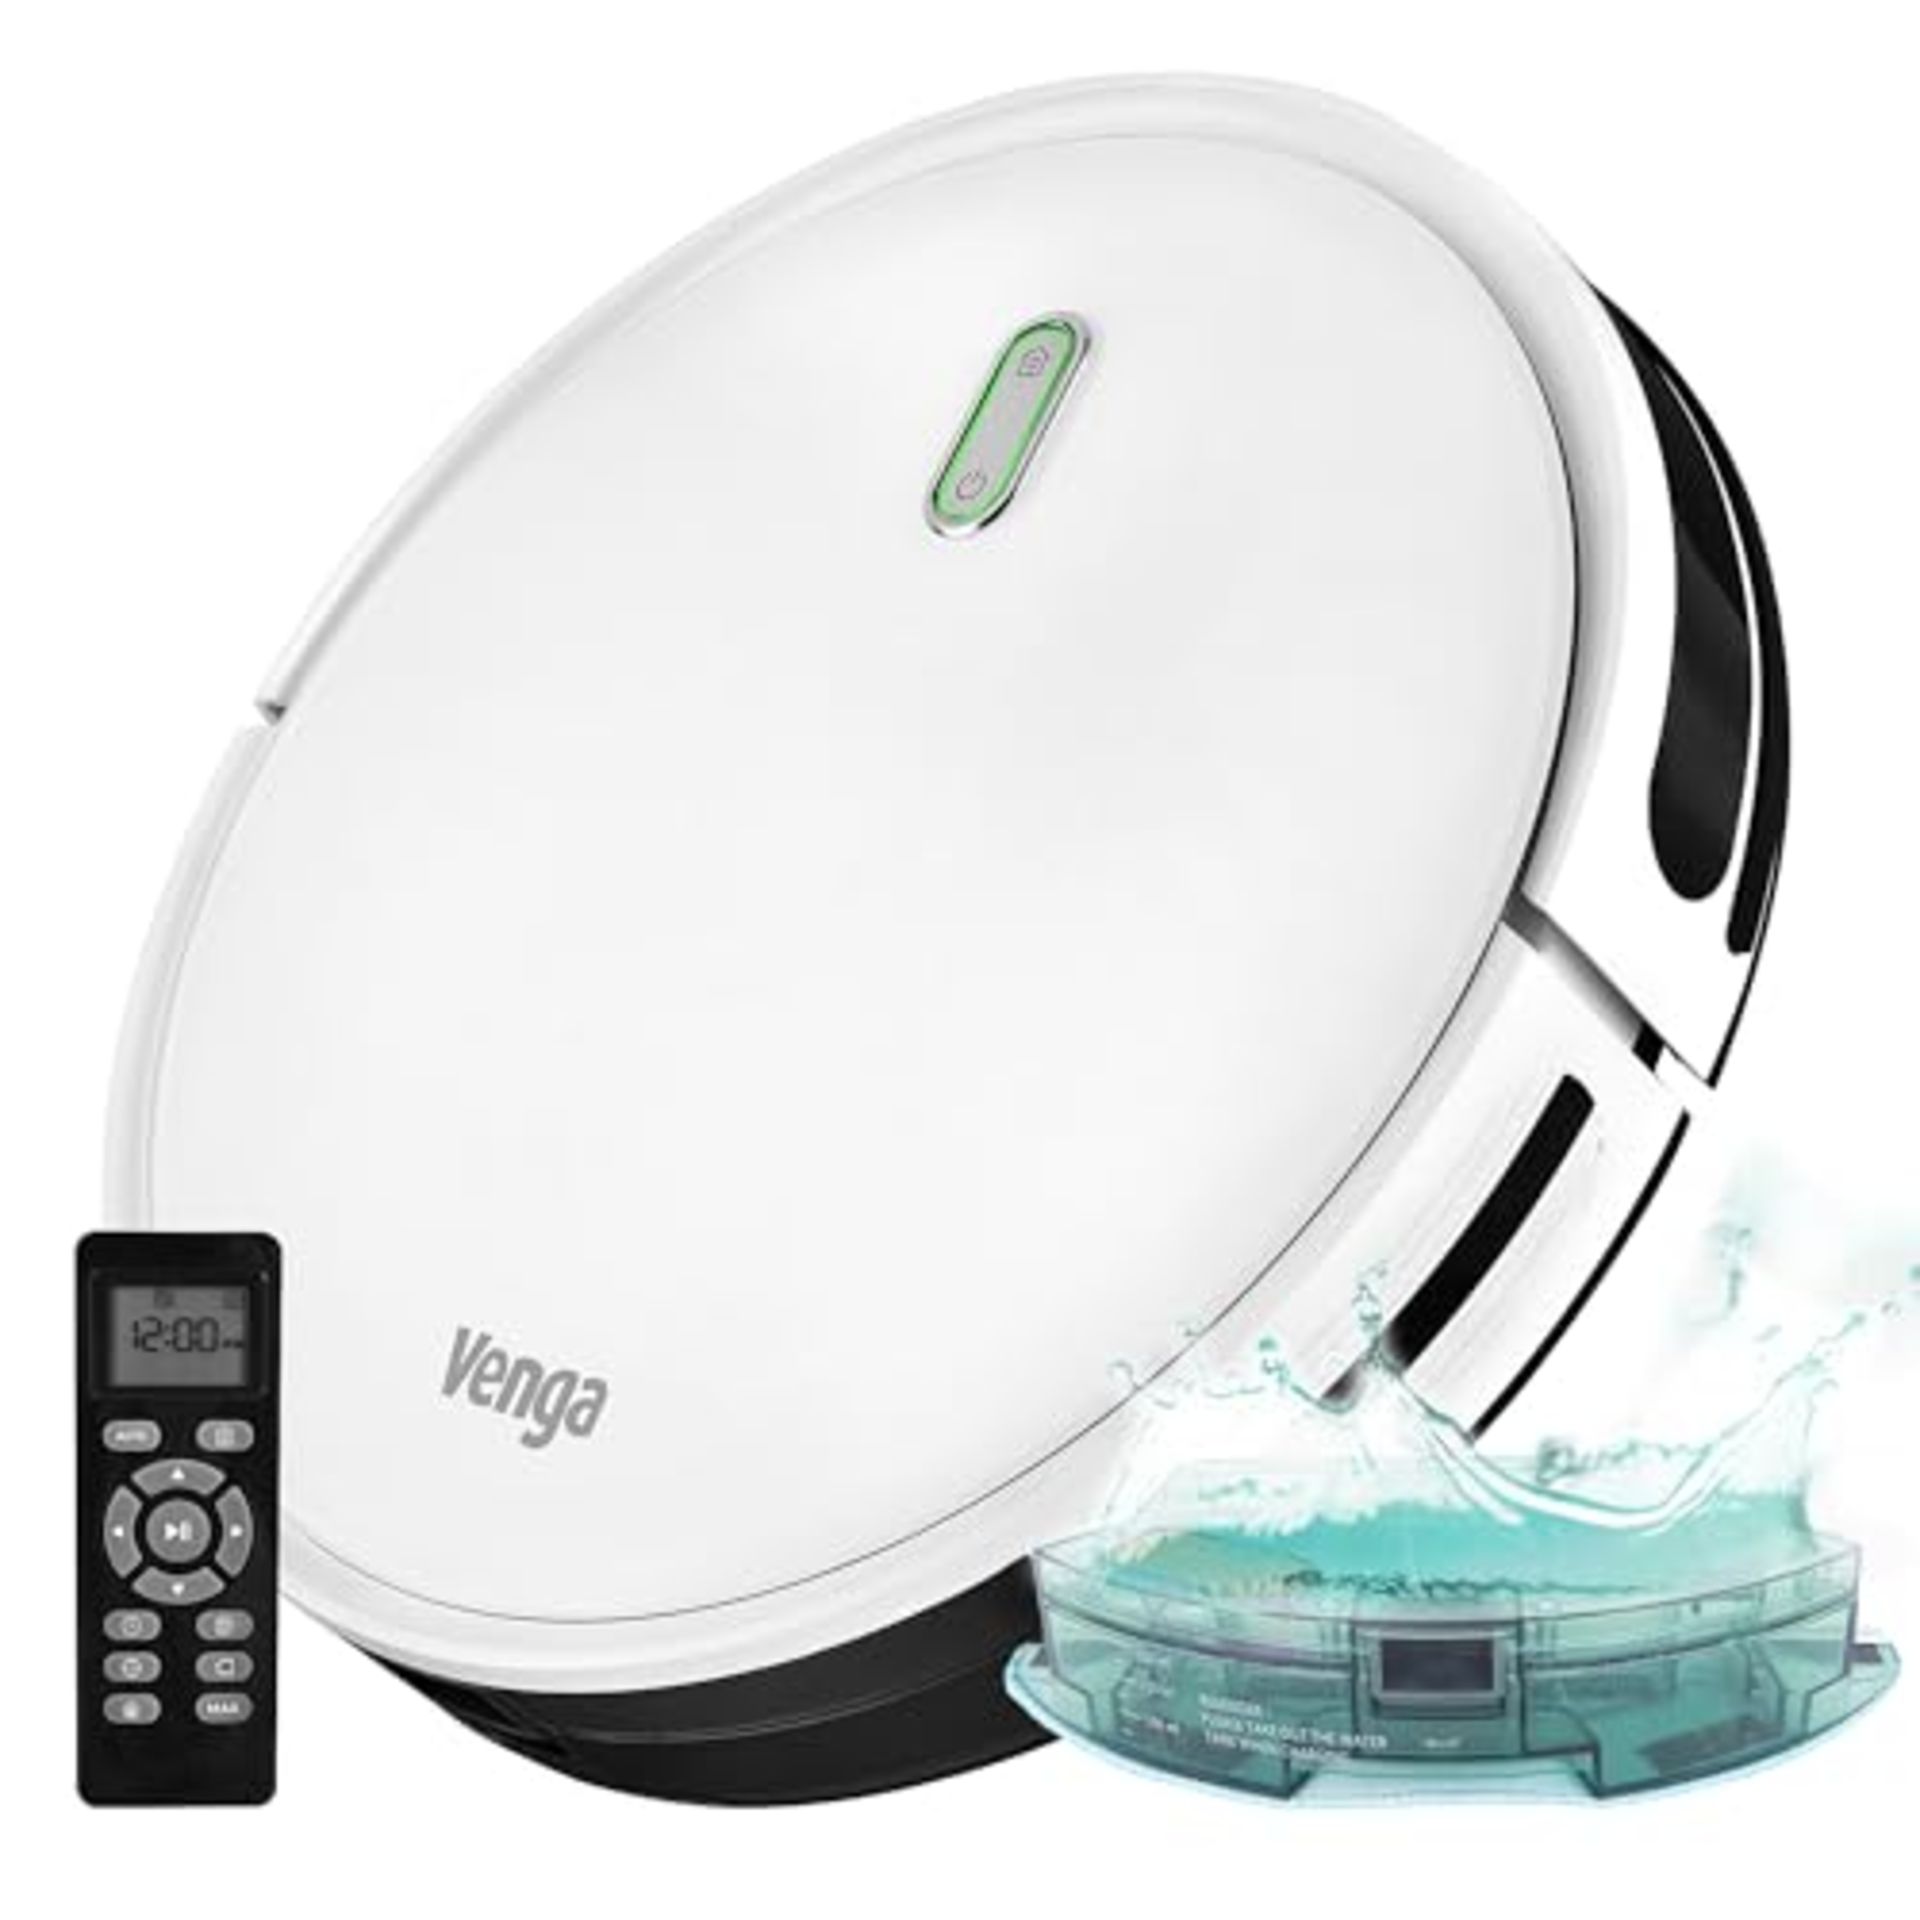 Venga! Robot Vacuum Cleaner with Mop, Easy to Use, 6 Cleaning Modes, Quiet Action, White, VG RVC 30